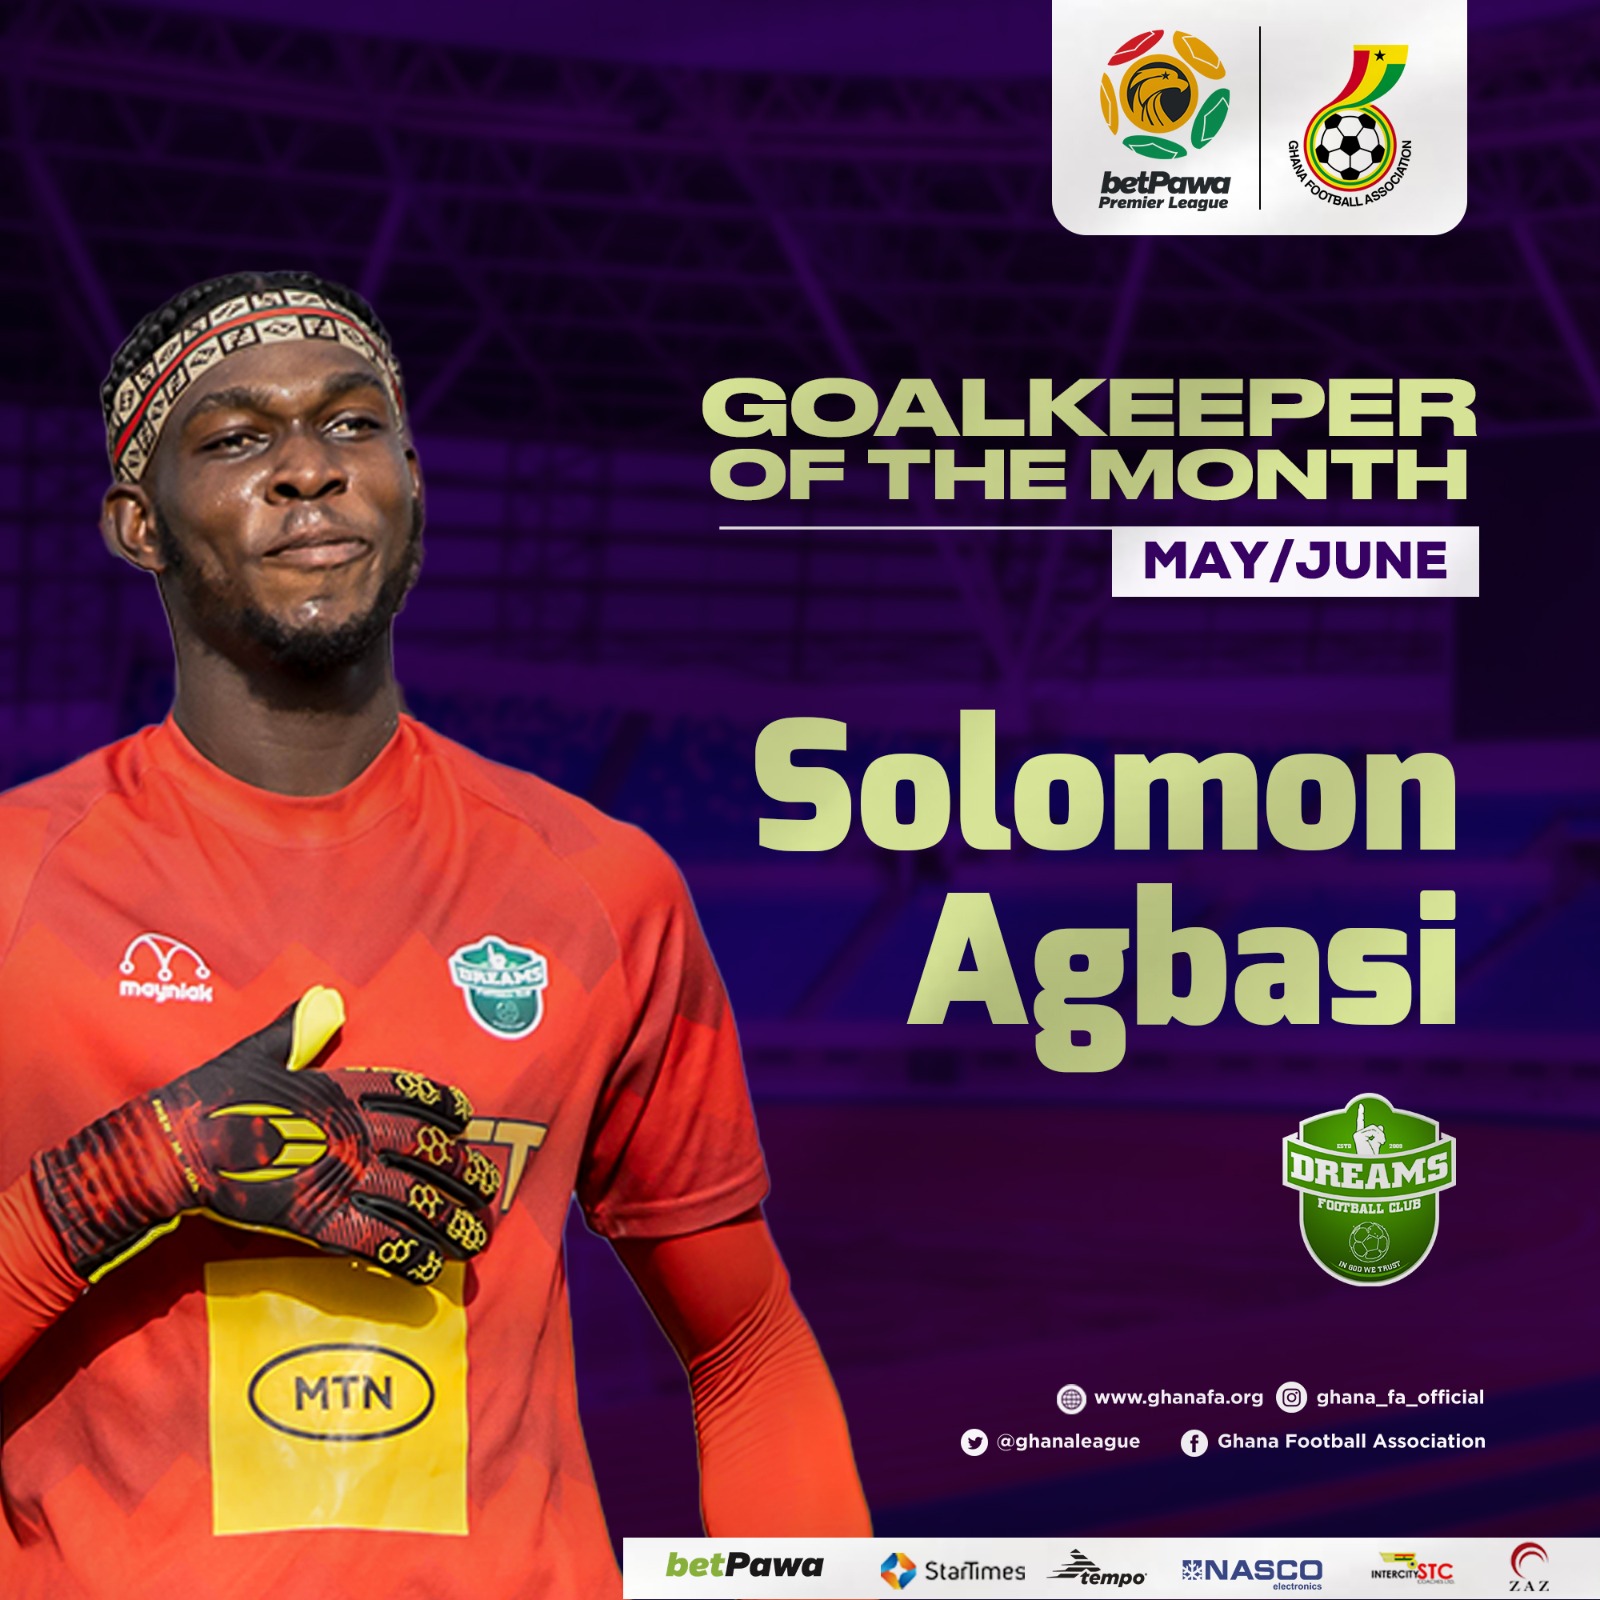 Solomon Agbasi wins May/June goalkeeper of the month award